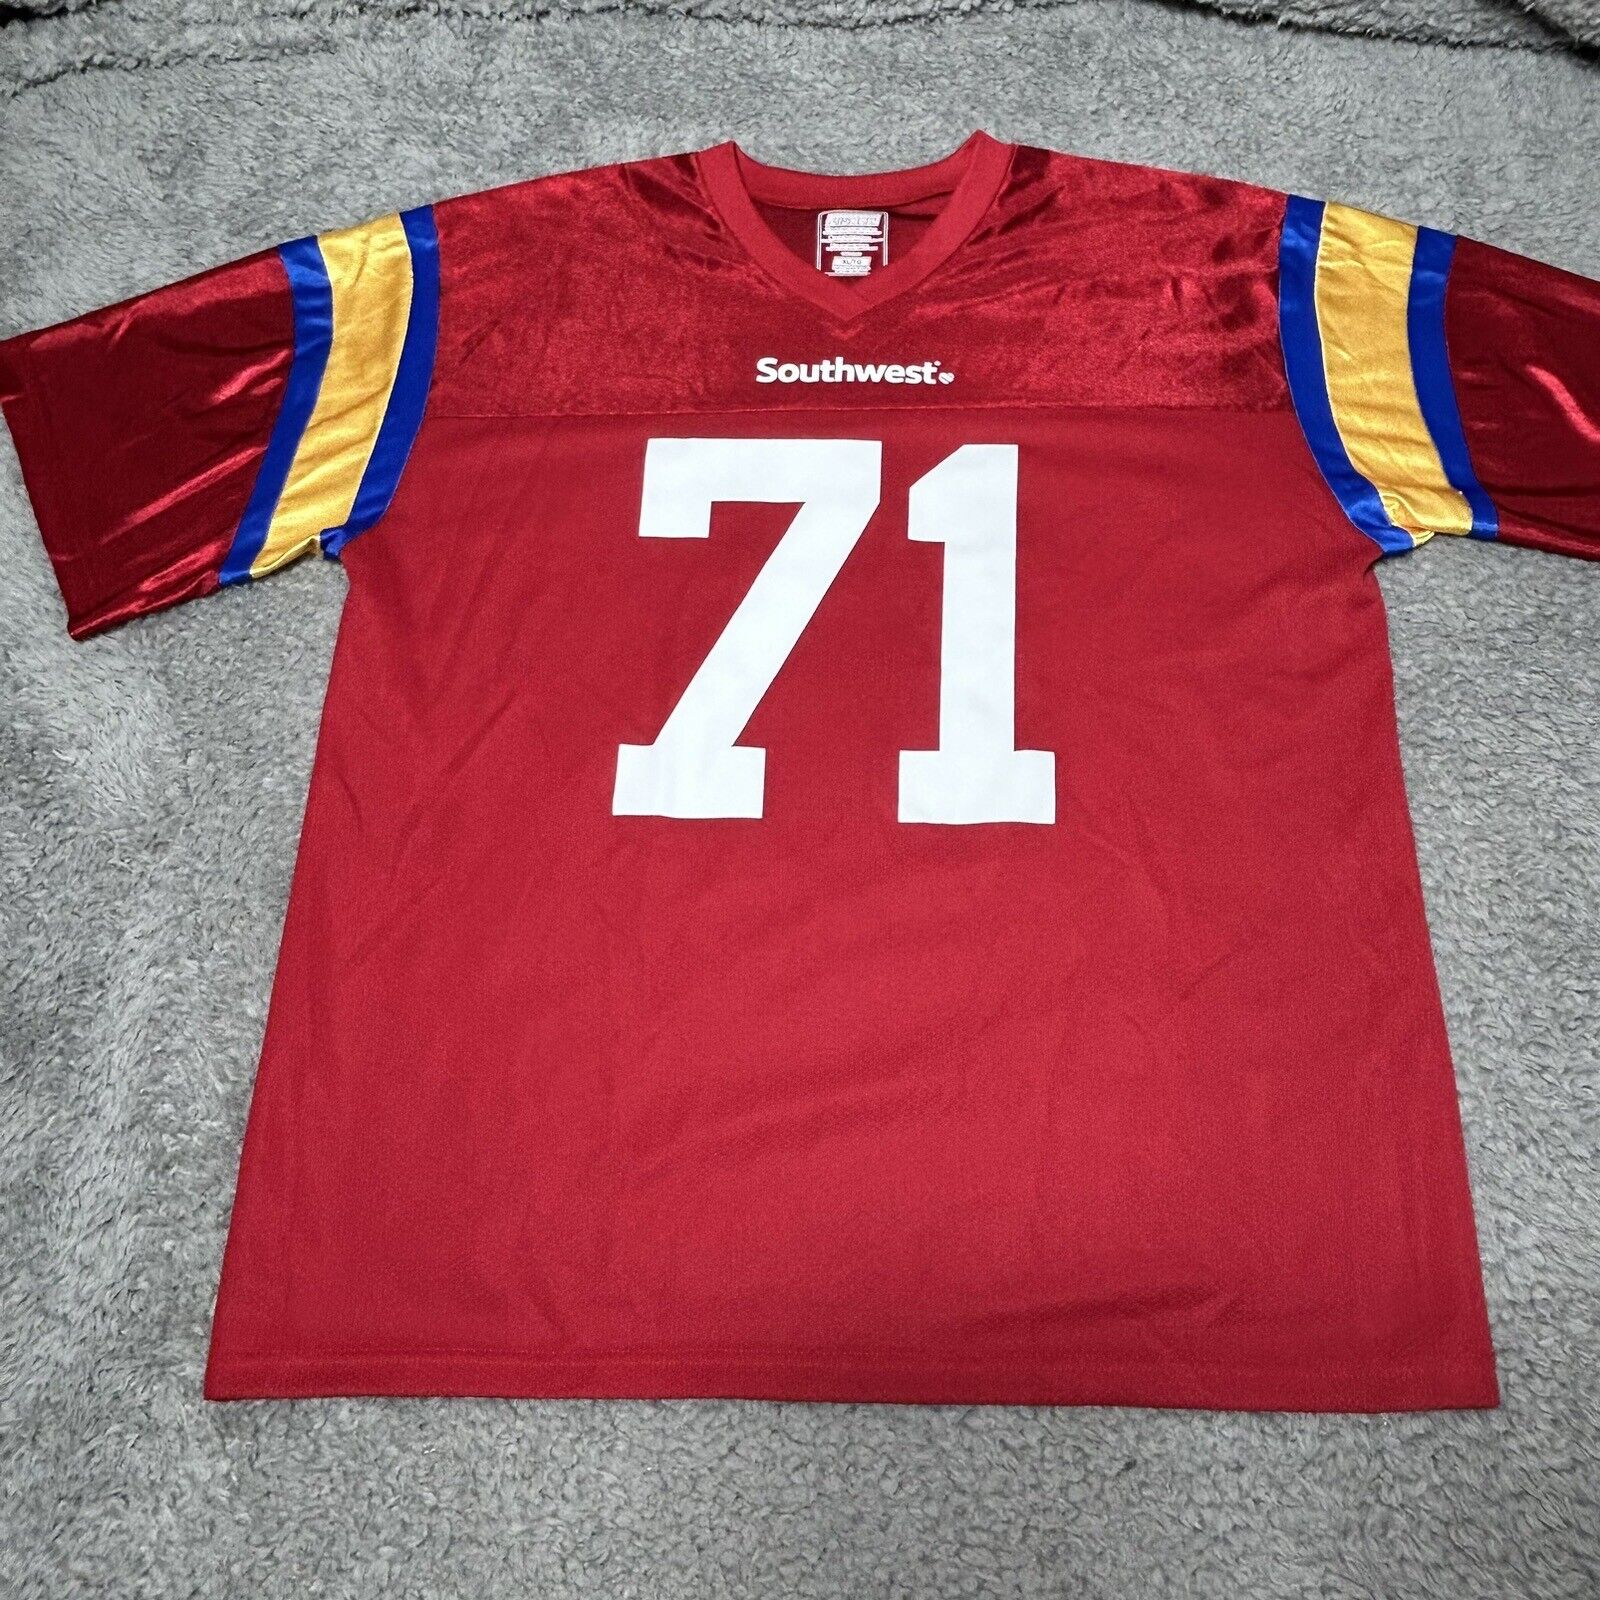 Southwest Airlines Football Jersey #71 All Heart Sz XL Vintage